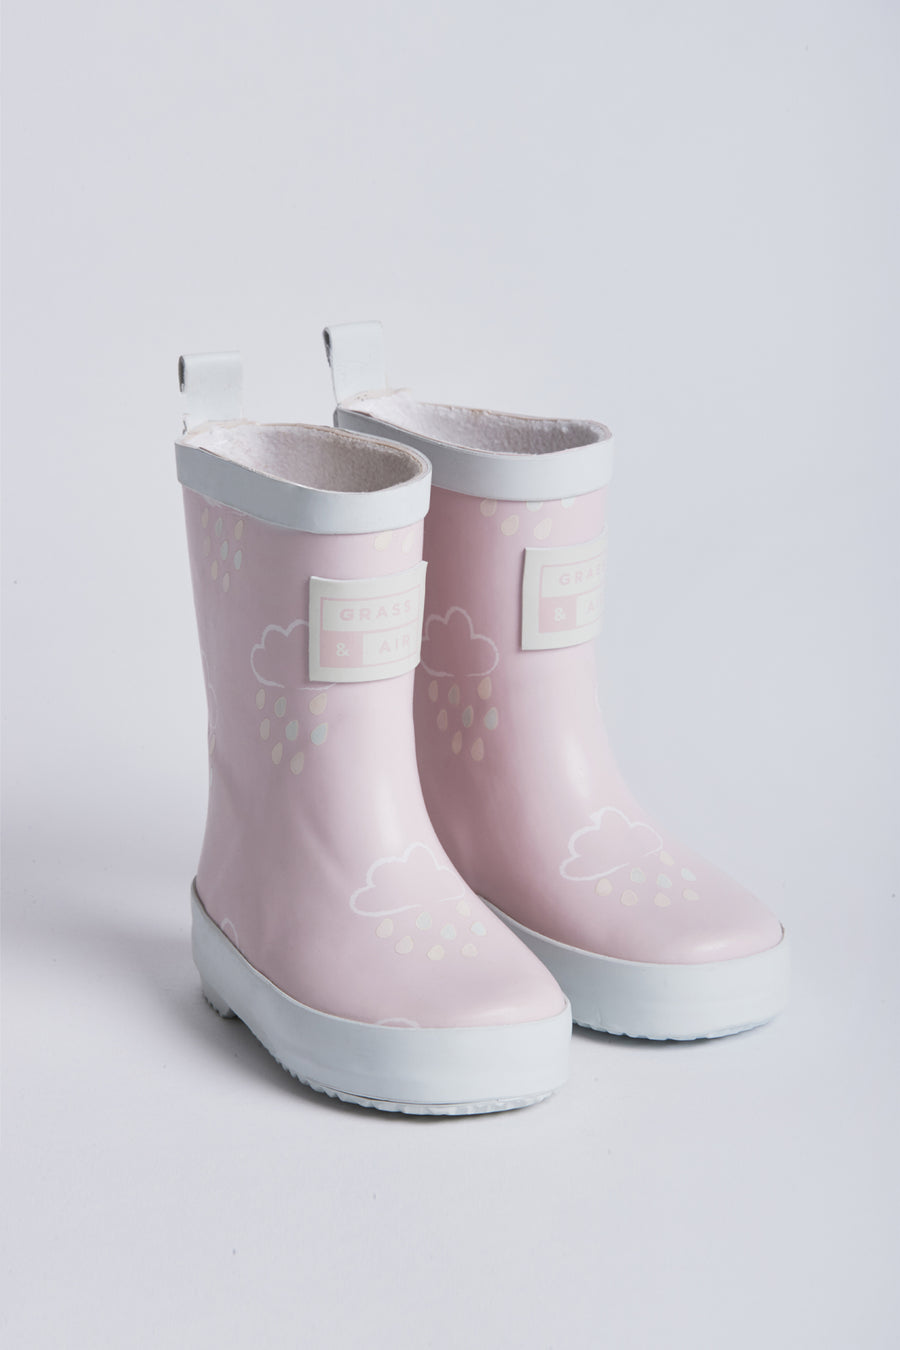 Grass and Air wellies|Infant |Colour Changing|Pale Pink